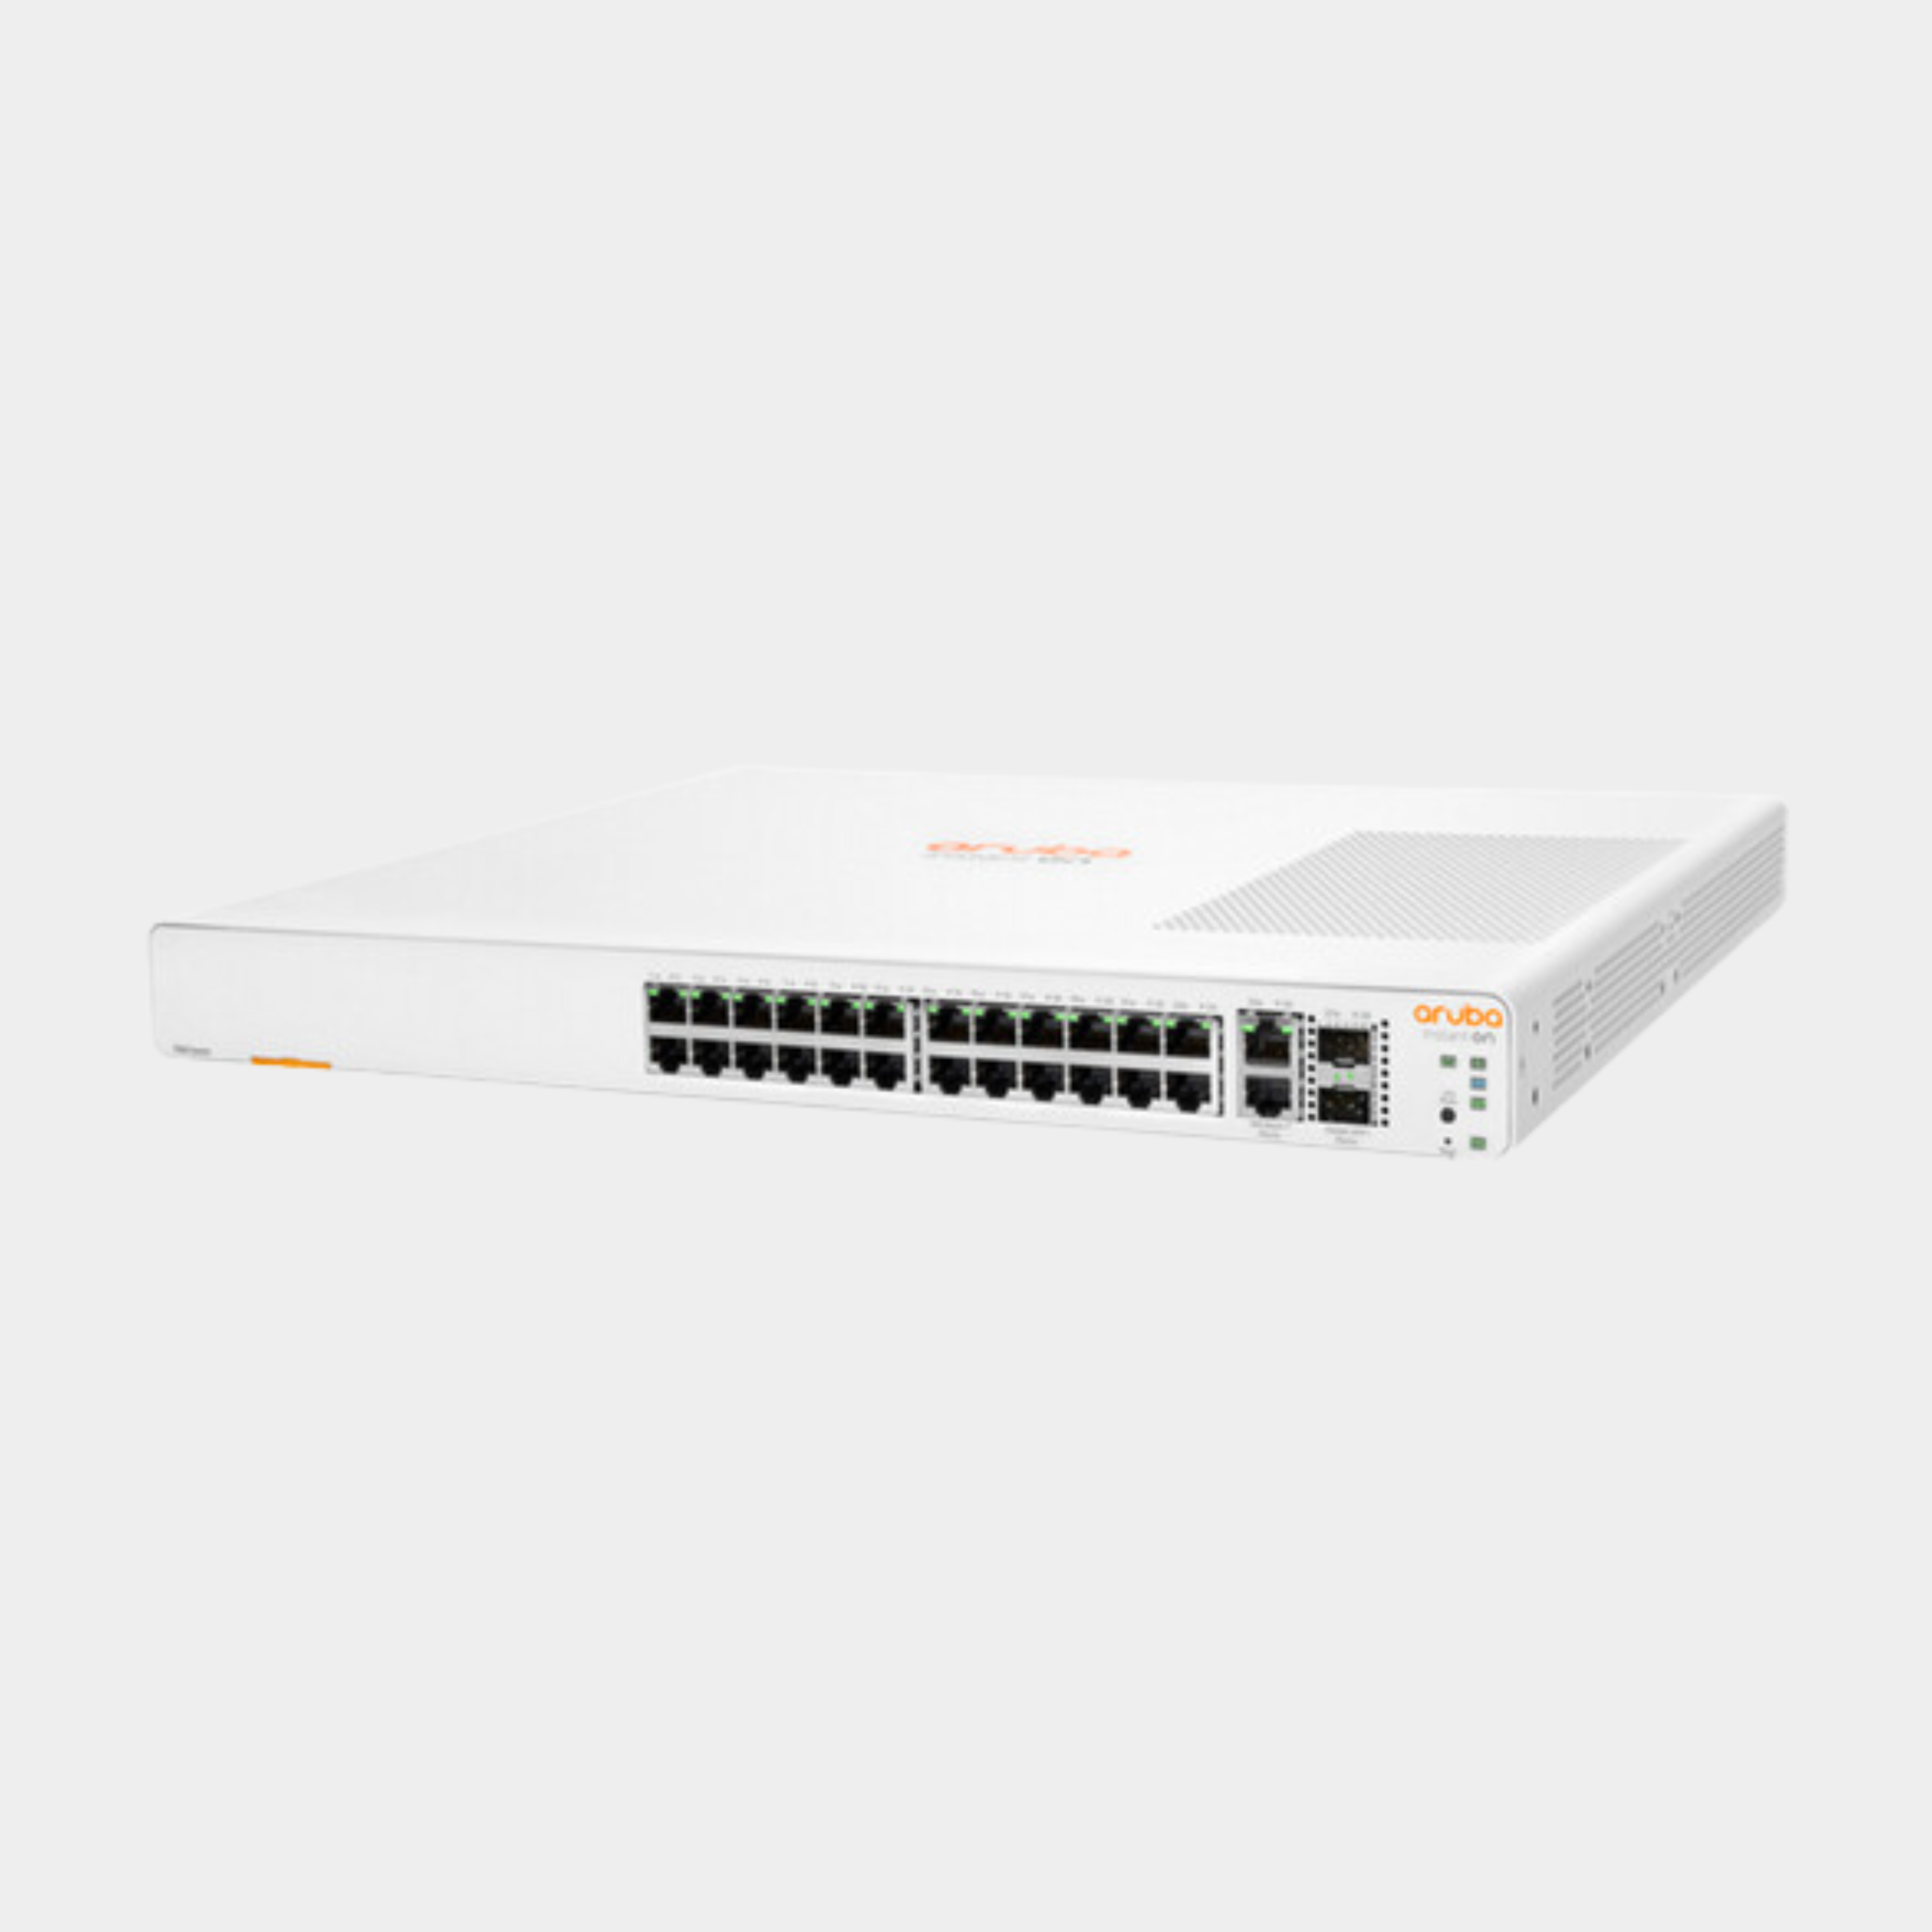 HPE Aruba Aruba Instant On 1960 24G 2XGT 2SFP+ Switch (JL806A) | Limited Lifetime Protection